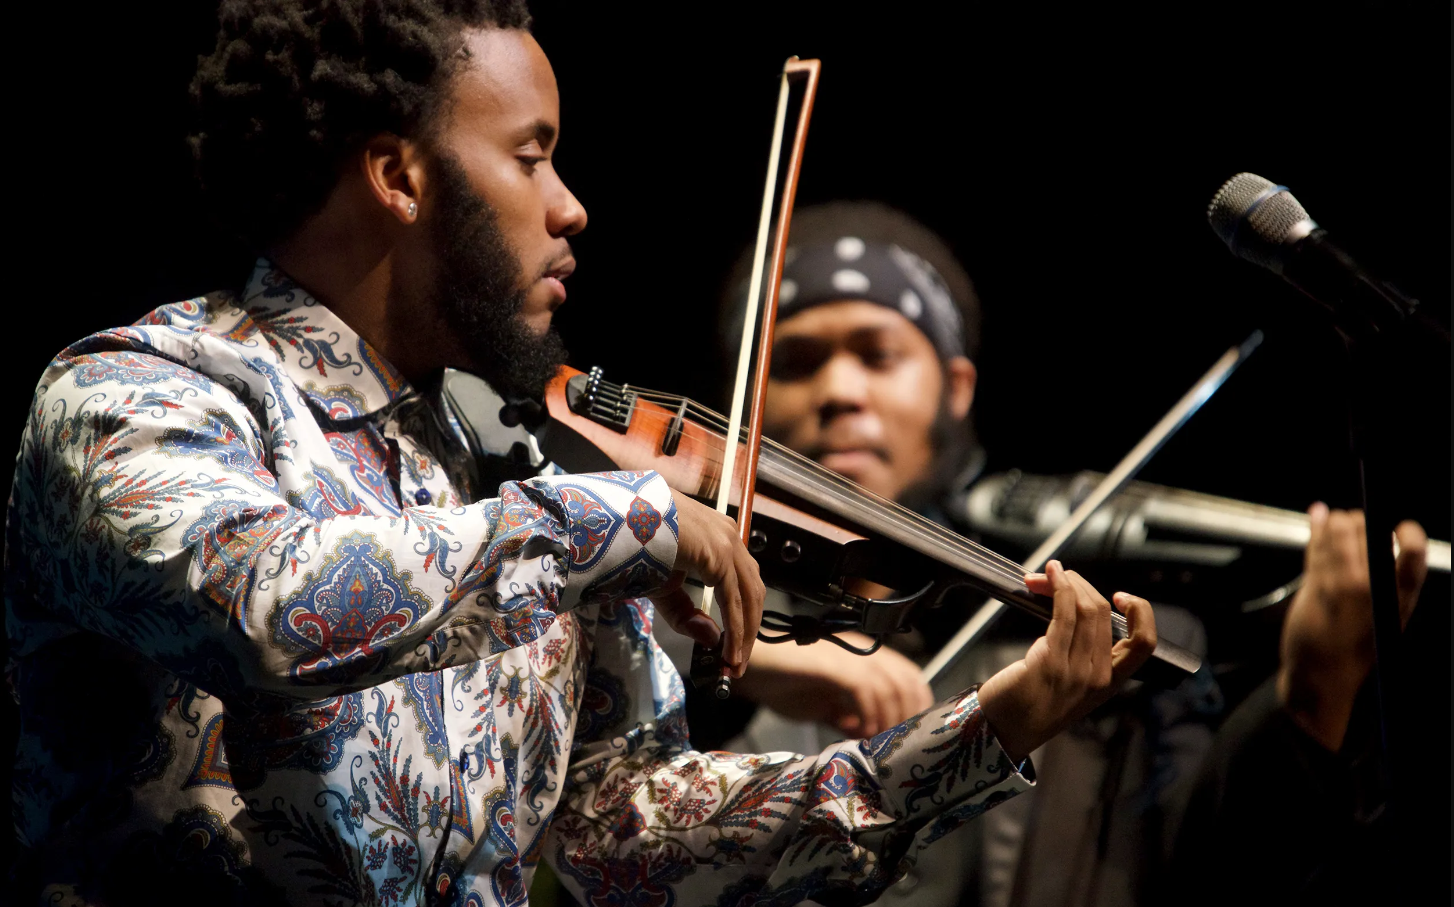 Image of Sons of Mystro Duo playing the violin in front of a microphone